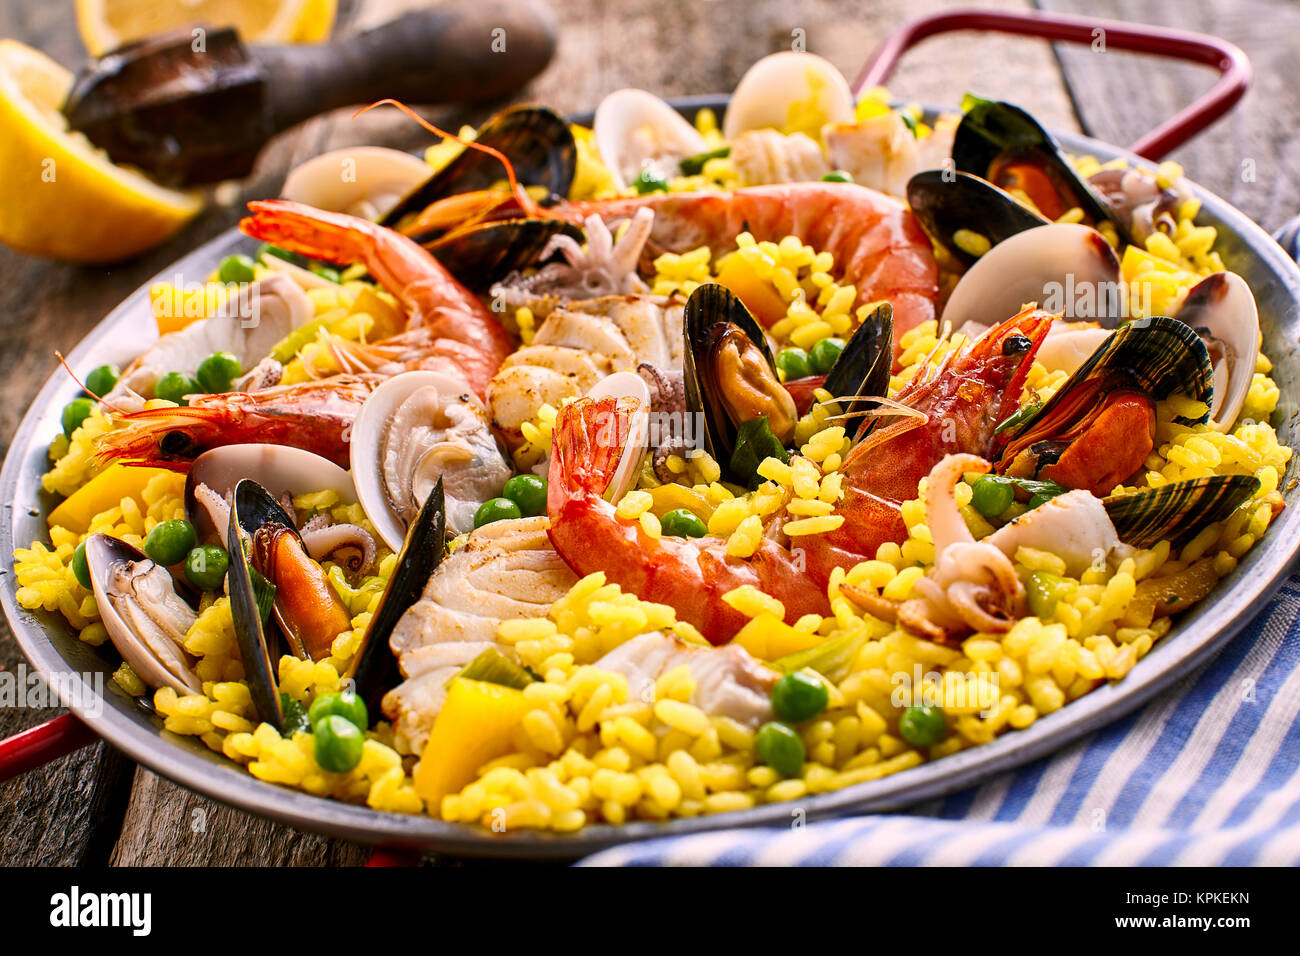 Close Up of Colorful Spanish Seafood Paella Dish with Langostina and Shellfish Served in Shallow Pan with Red Handles on Rustic Wooden Table with Fresh Lemon Garnish in Background Stock Photo